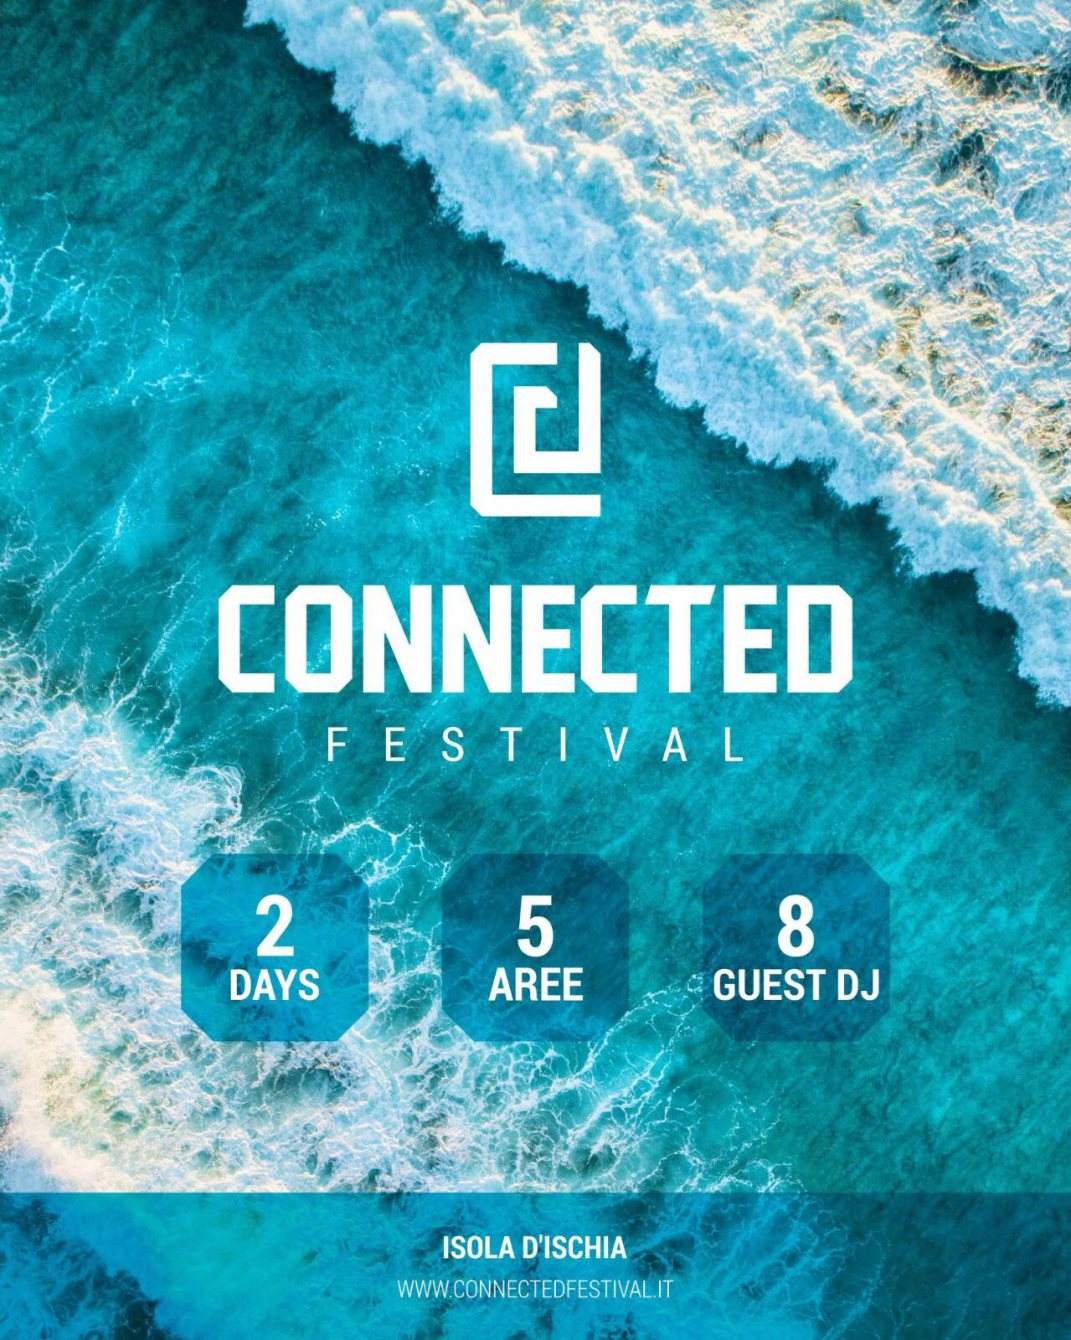 Connected Festival - フライヤー裏